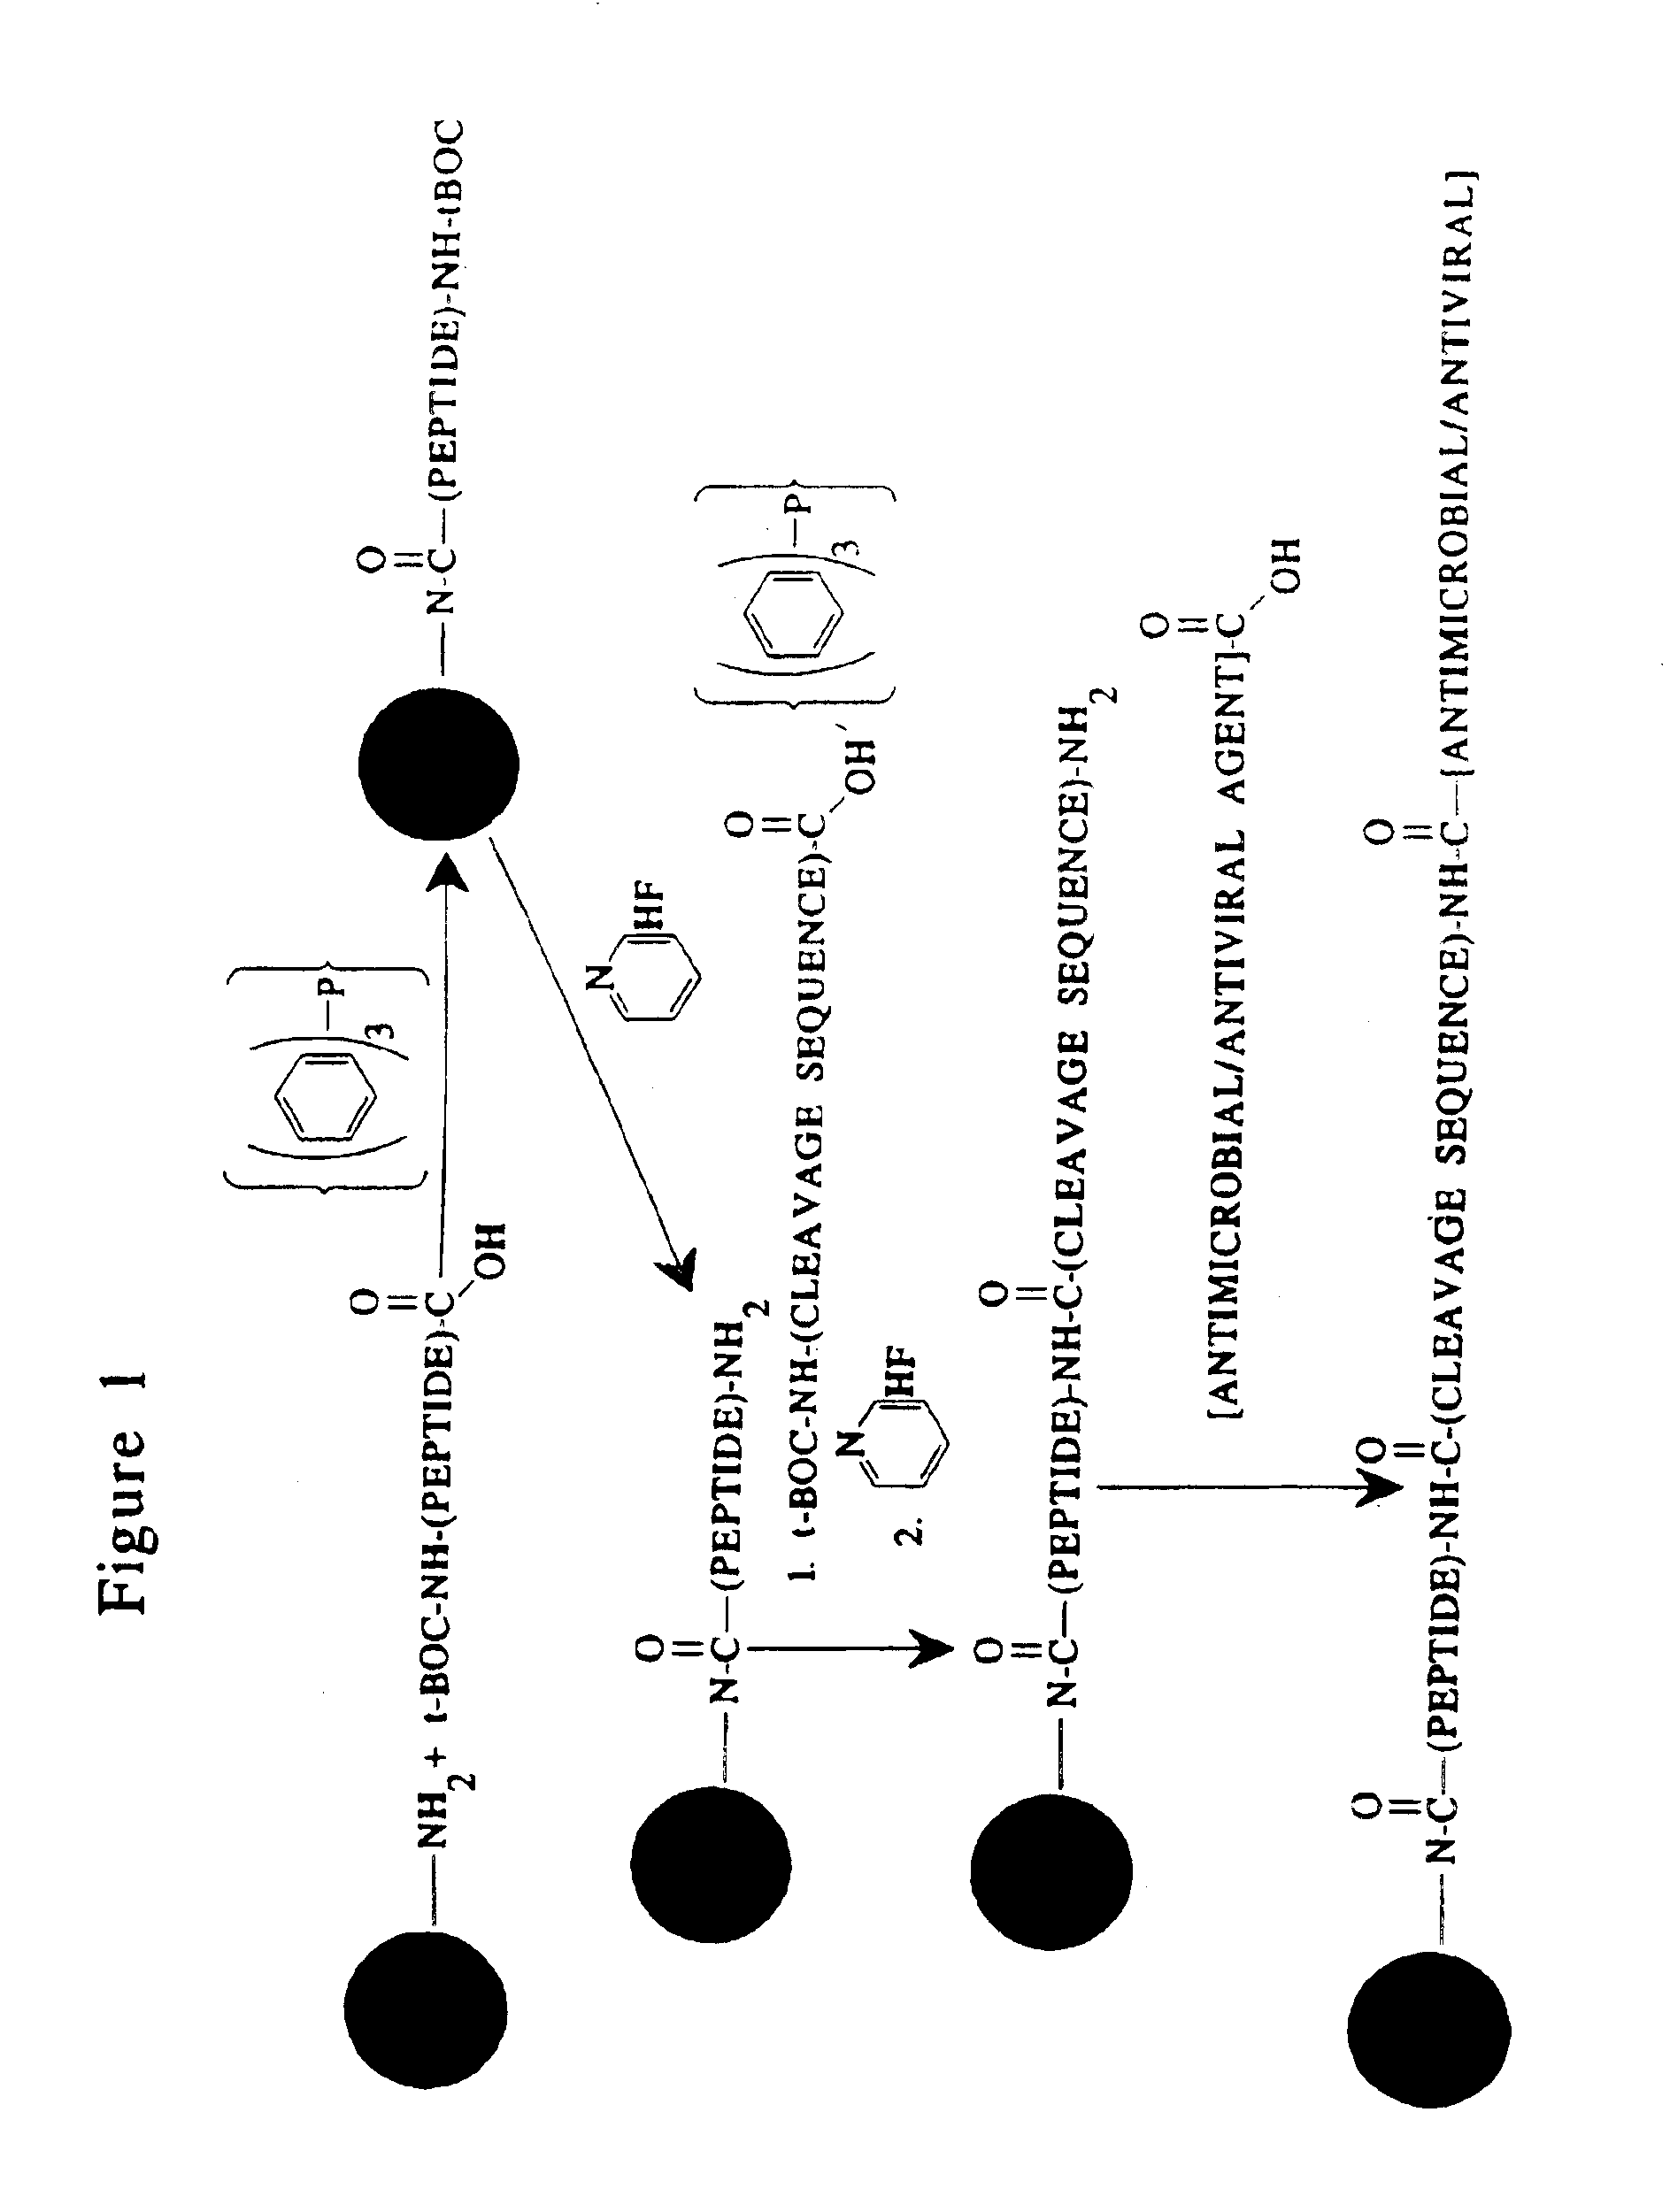 Composition containing porous microparticle impregnated with biologically-active compound for treatment of infection